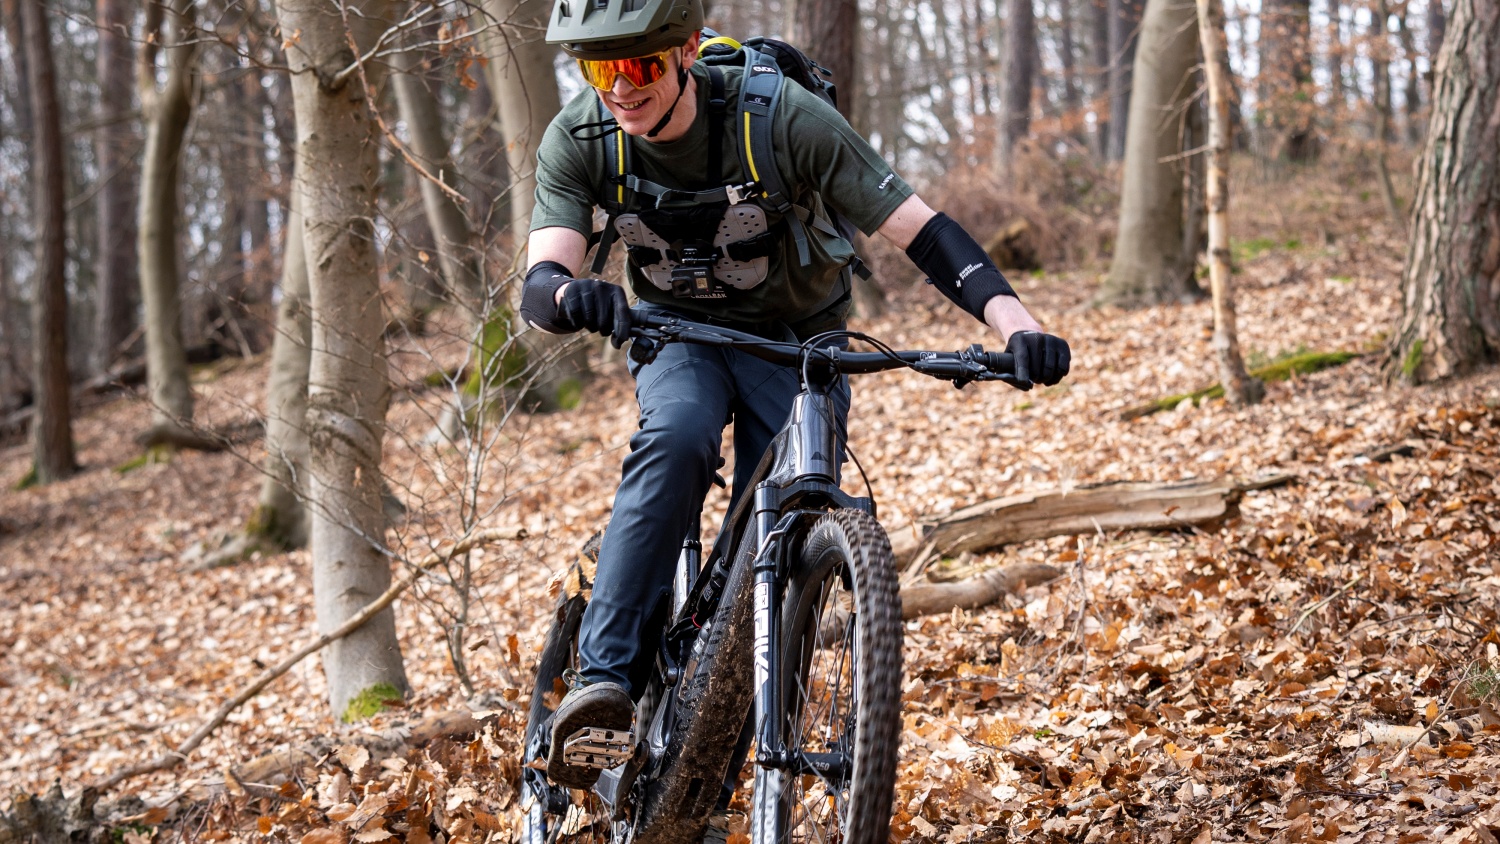 It's not a fake smile, Fredrik did enjoy riding the new Canyon in the Koblenz city forest. Photo by karinpasterer.com